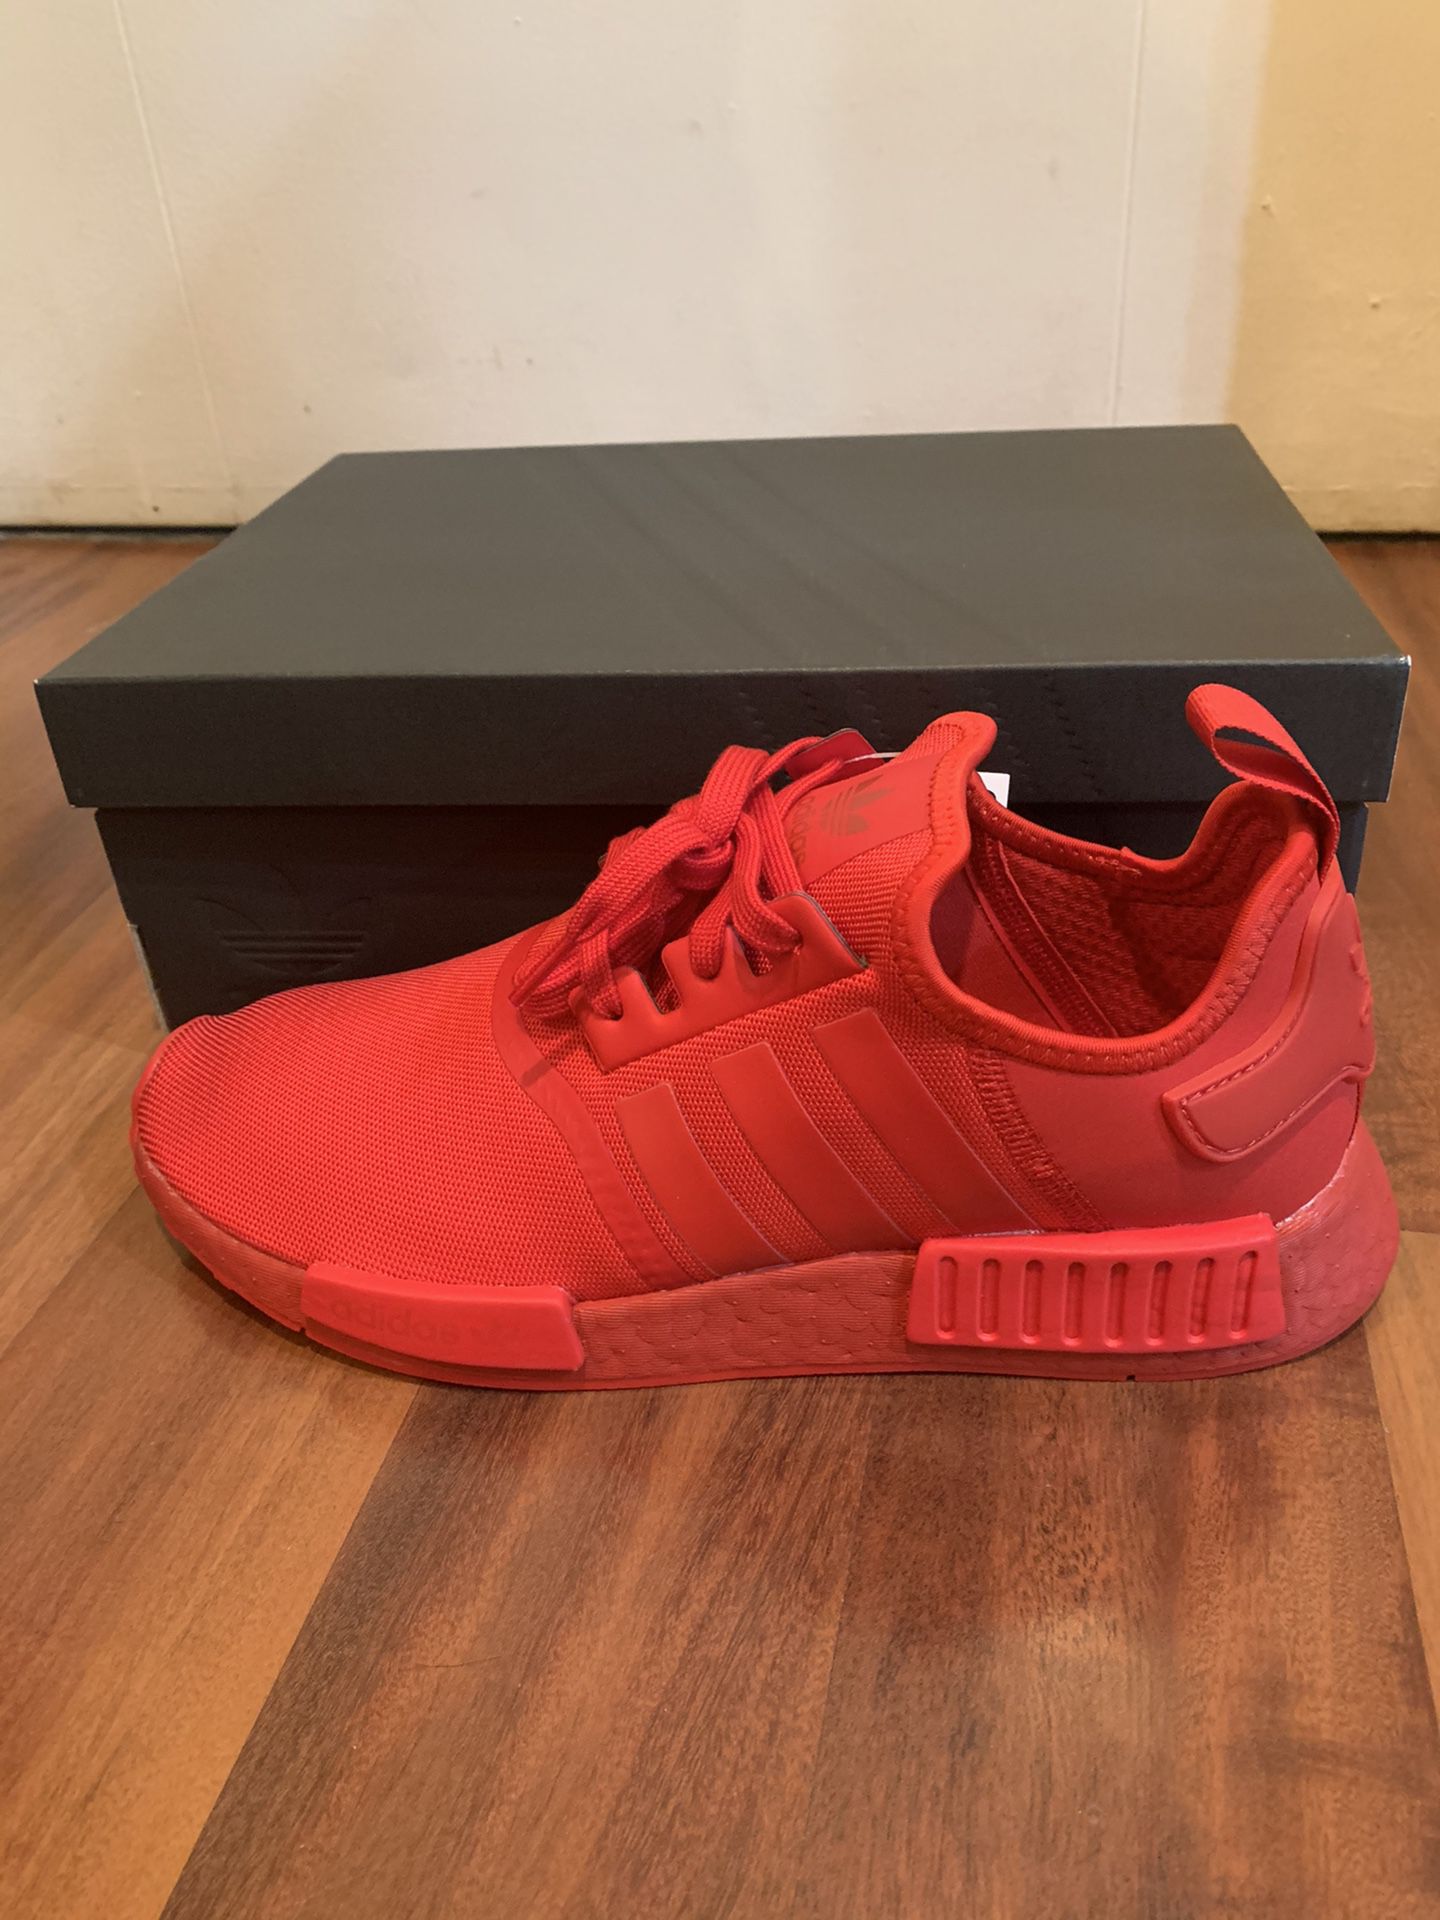 Brand New NMD R1 Size 11 Never Worn